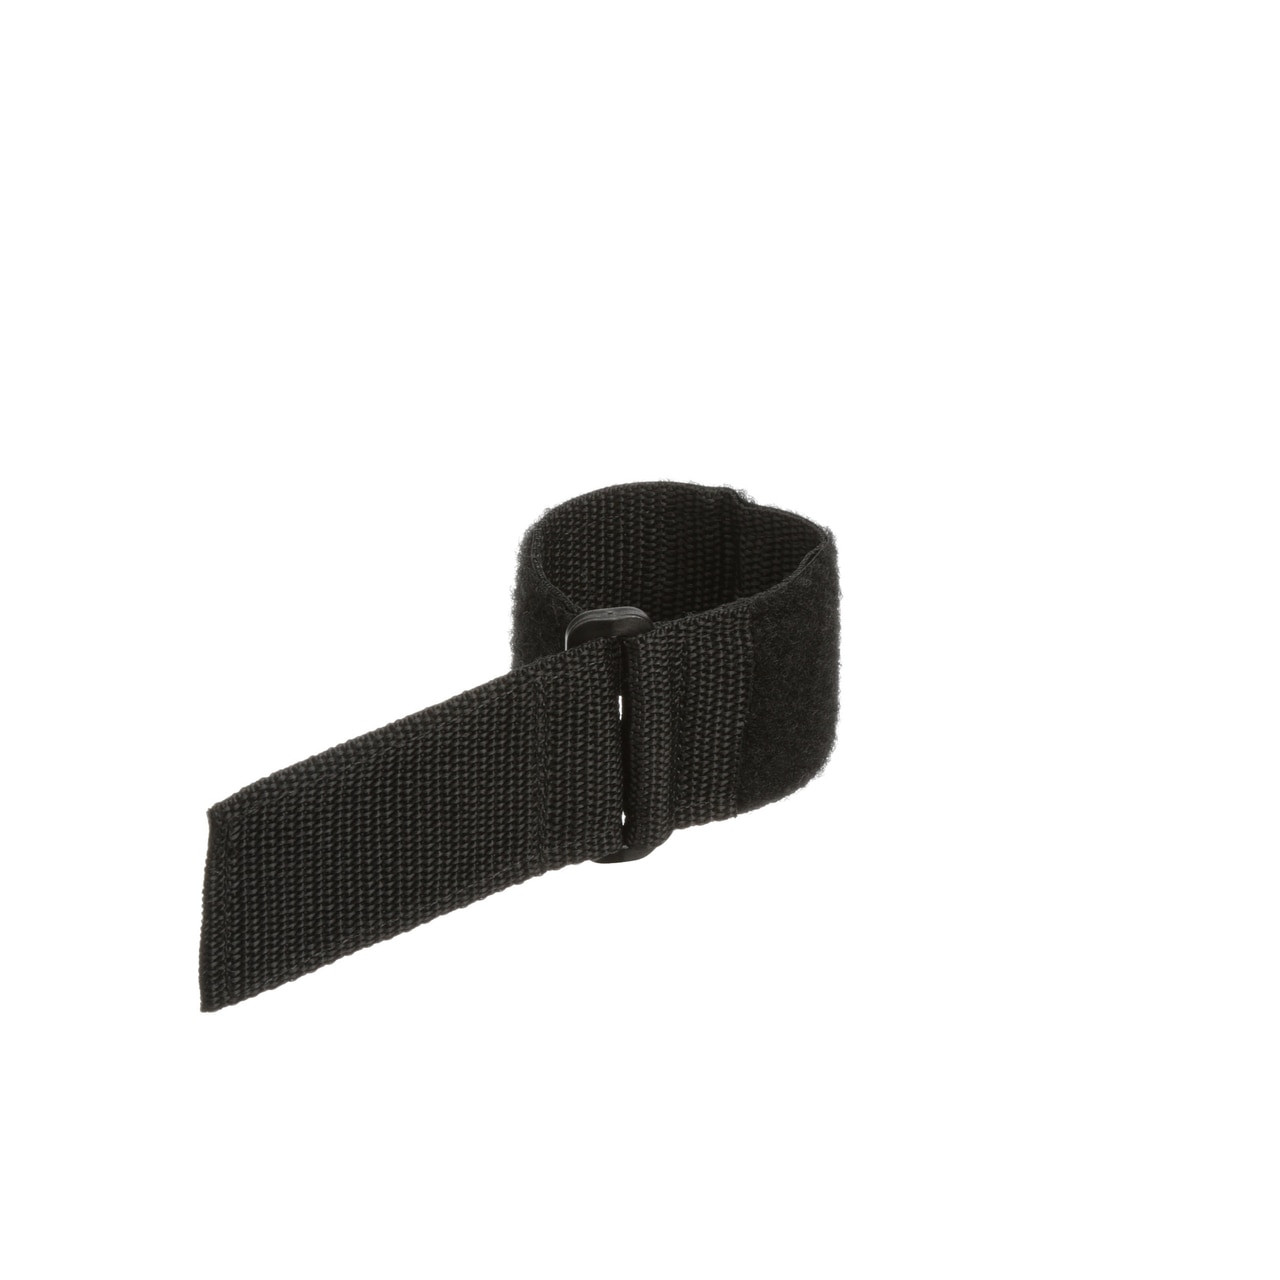 Industrial Velcro Brand Cinch Strap Backed with Webbing